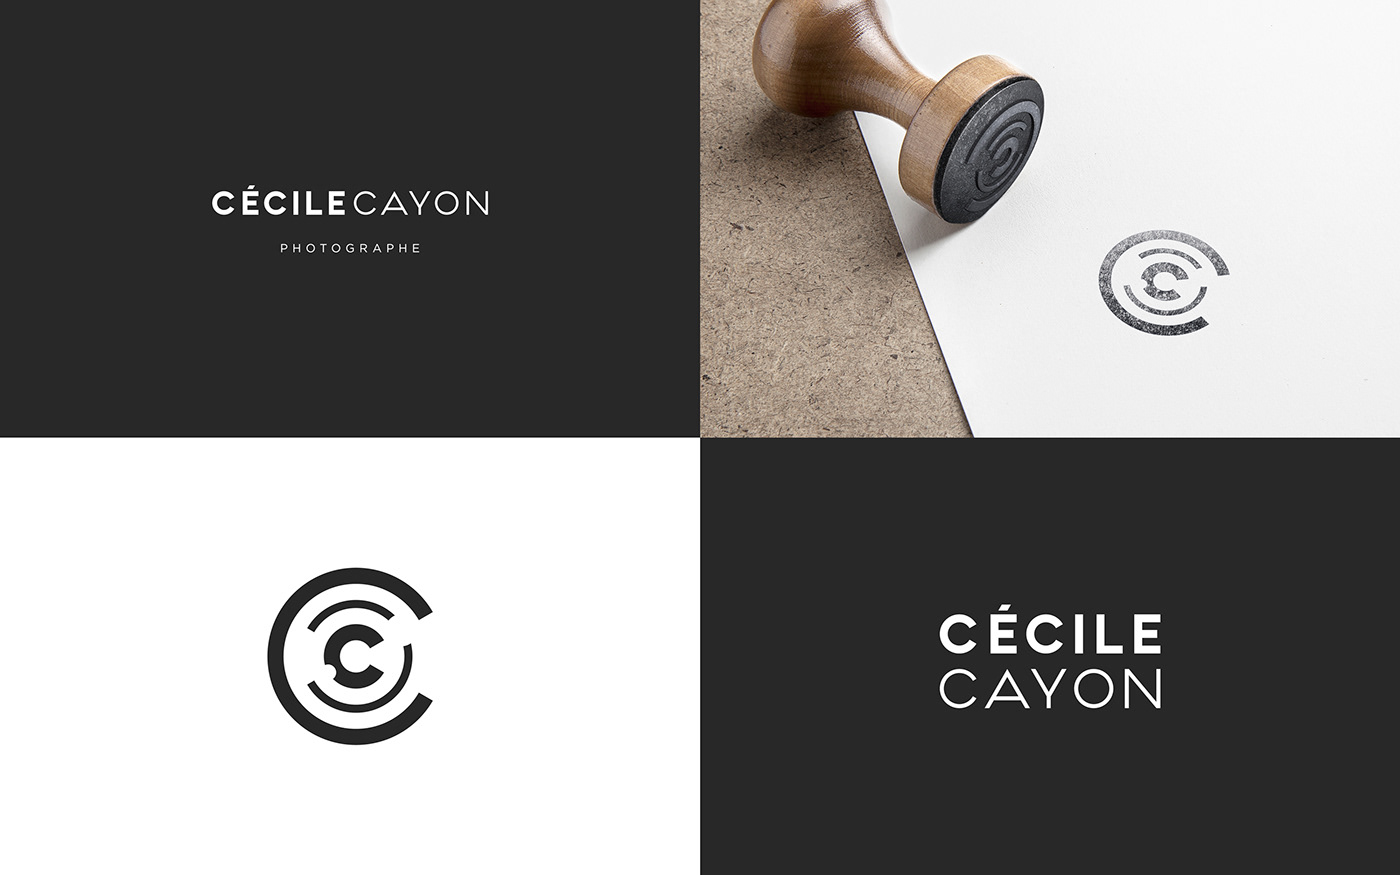 Logos and marks variations for a photographer's corporate identity